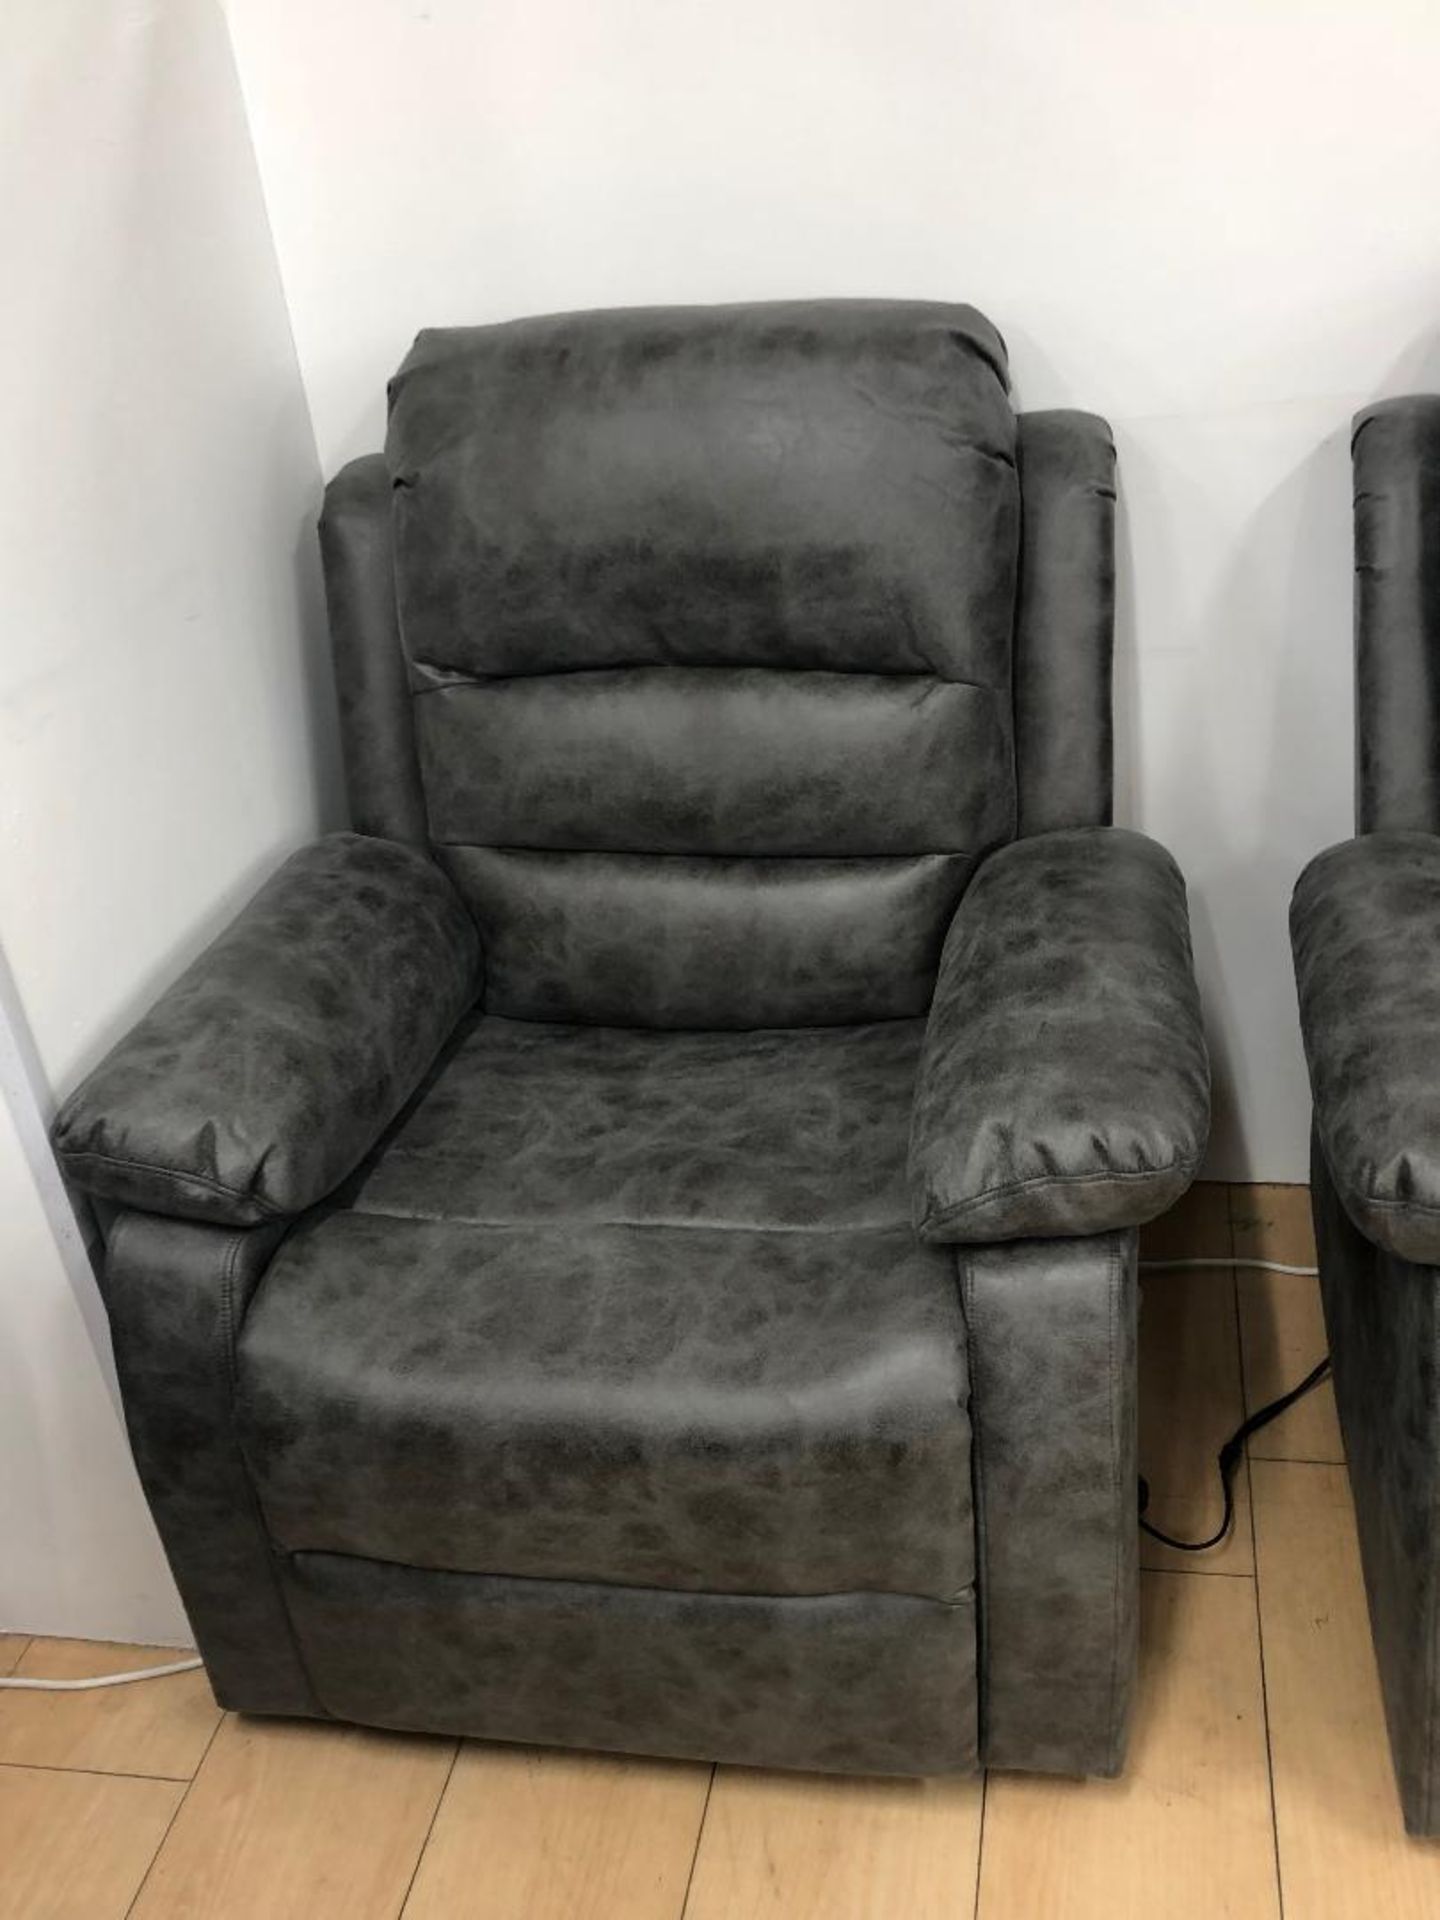 Brand new boxed Cartier 3 seater plus 2 seater plus arm chair in grey plush velvet suede fabric - Image 5 of 5